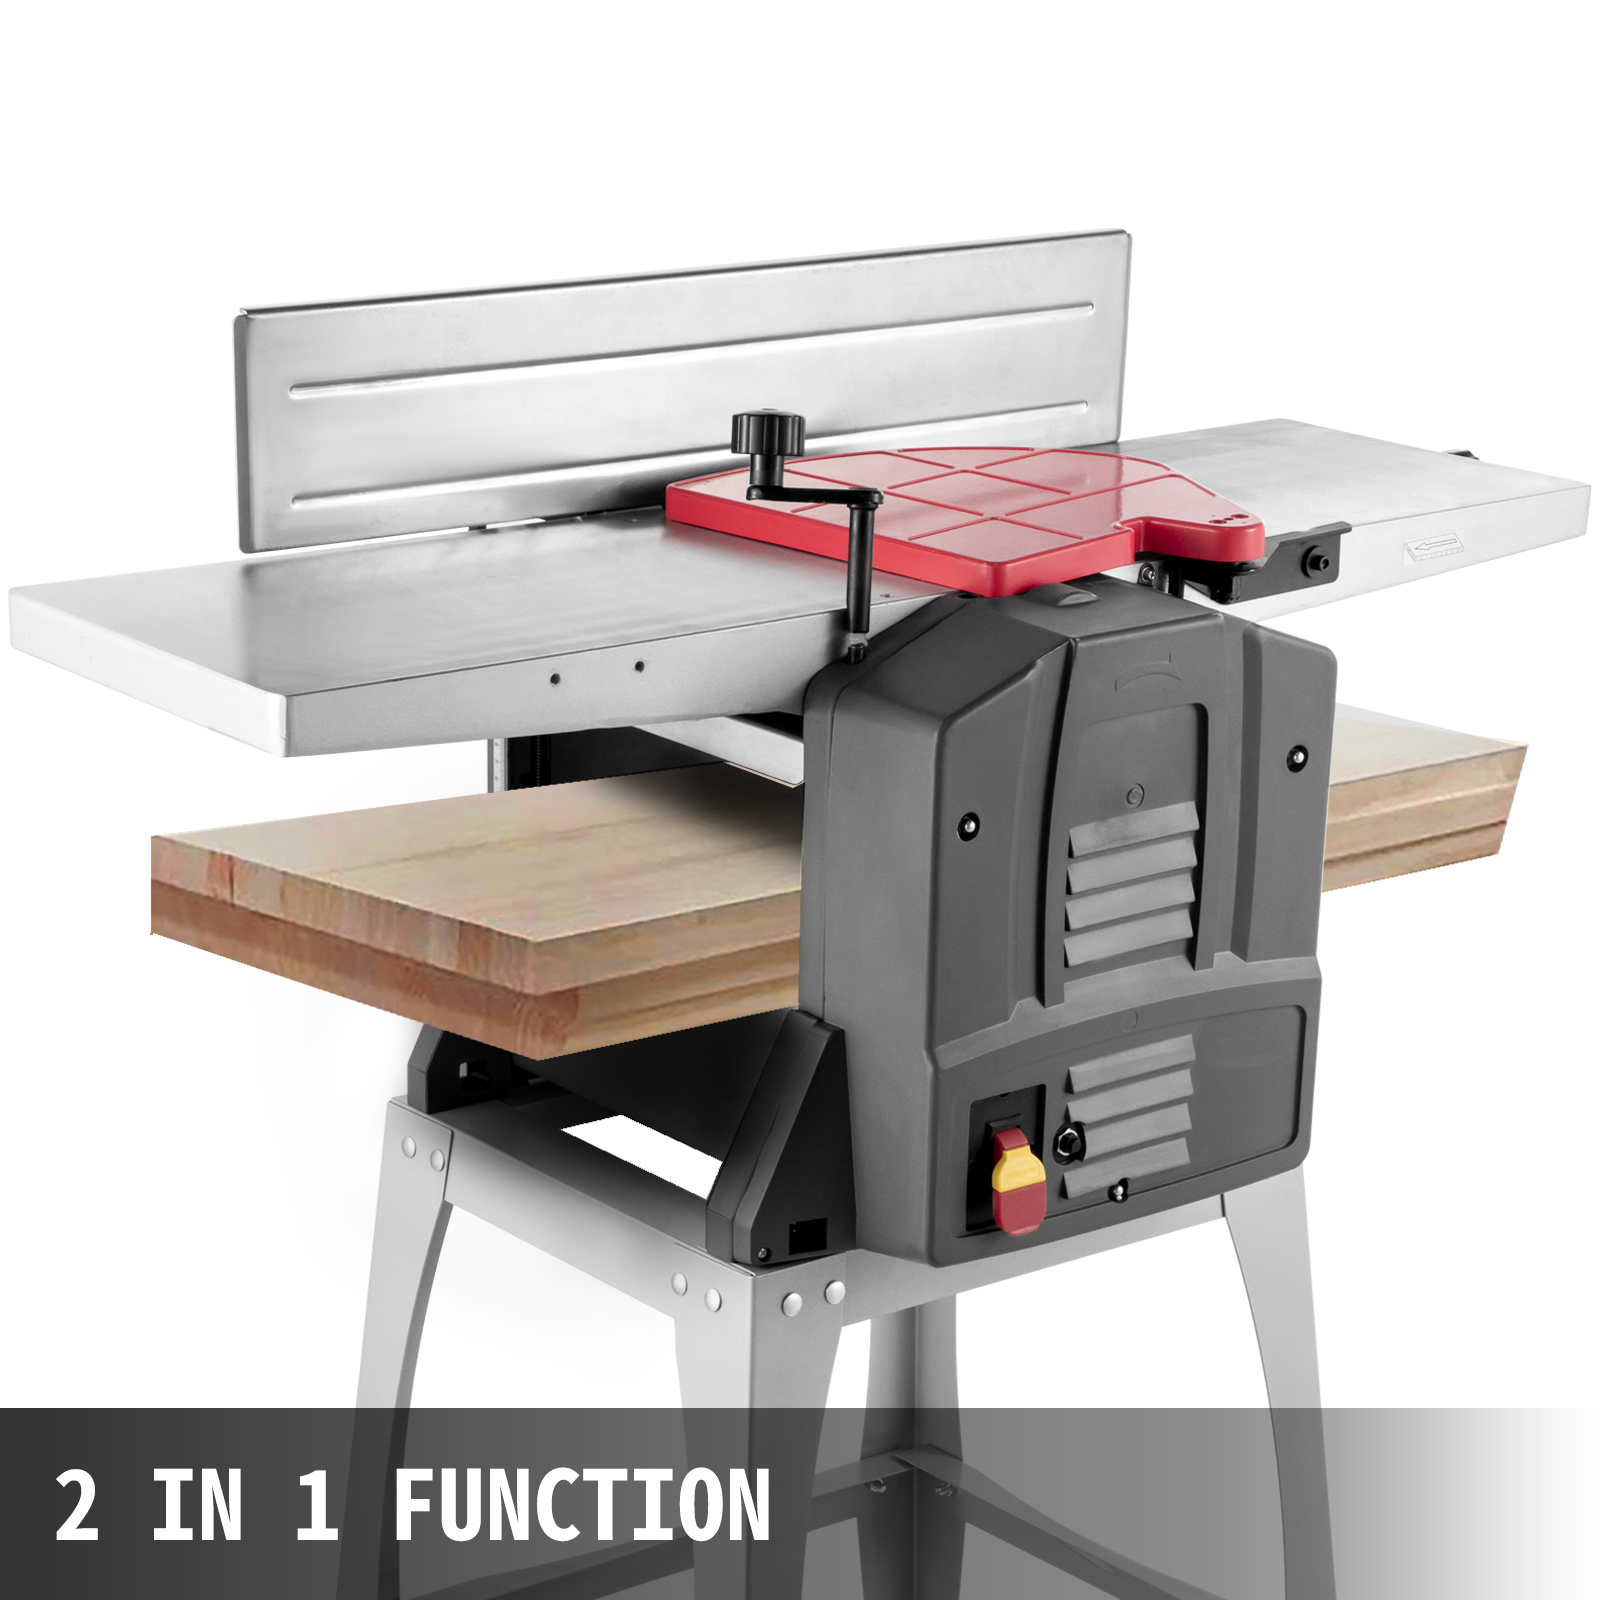 10 Inch Jointers Woodworking Benchtop Jointer Planer for 